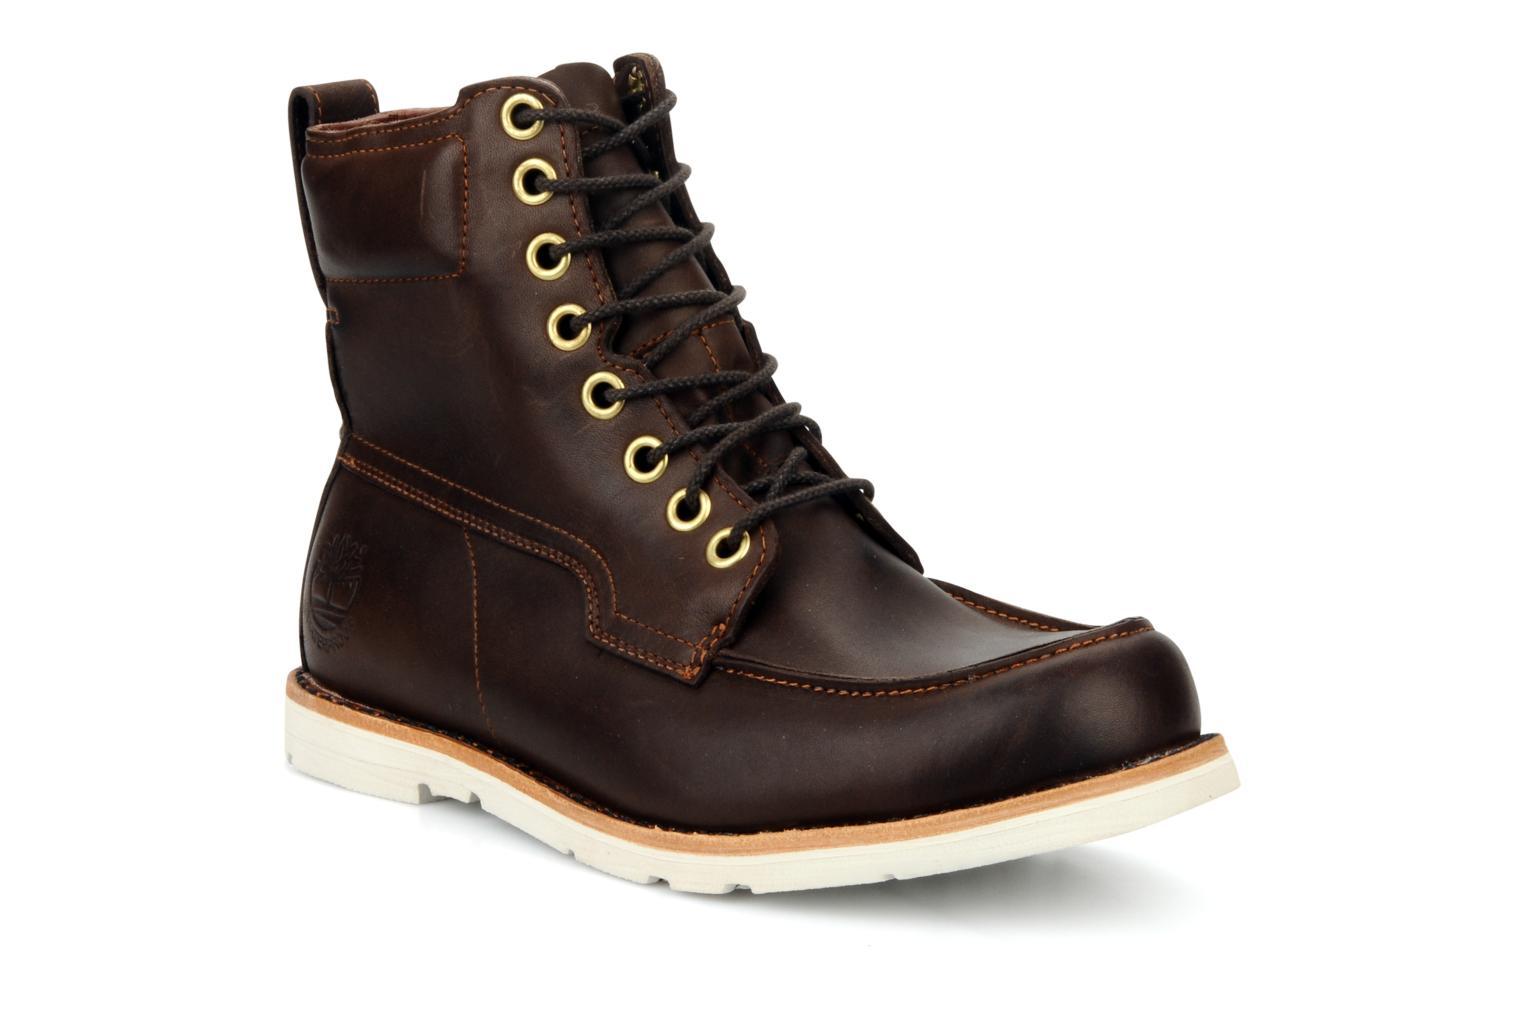 Foto Botines Timberland Earthkeepers original 2.0 rugged 6 moc toe boot Hombre